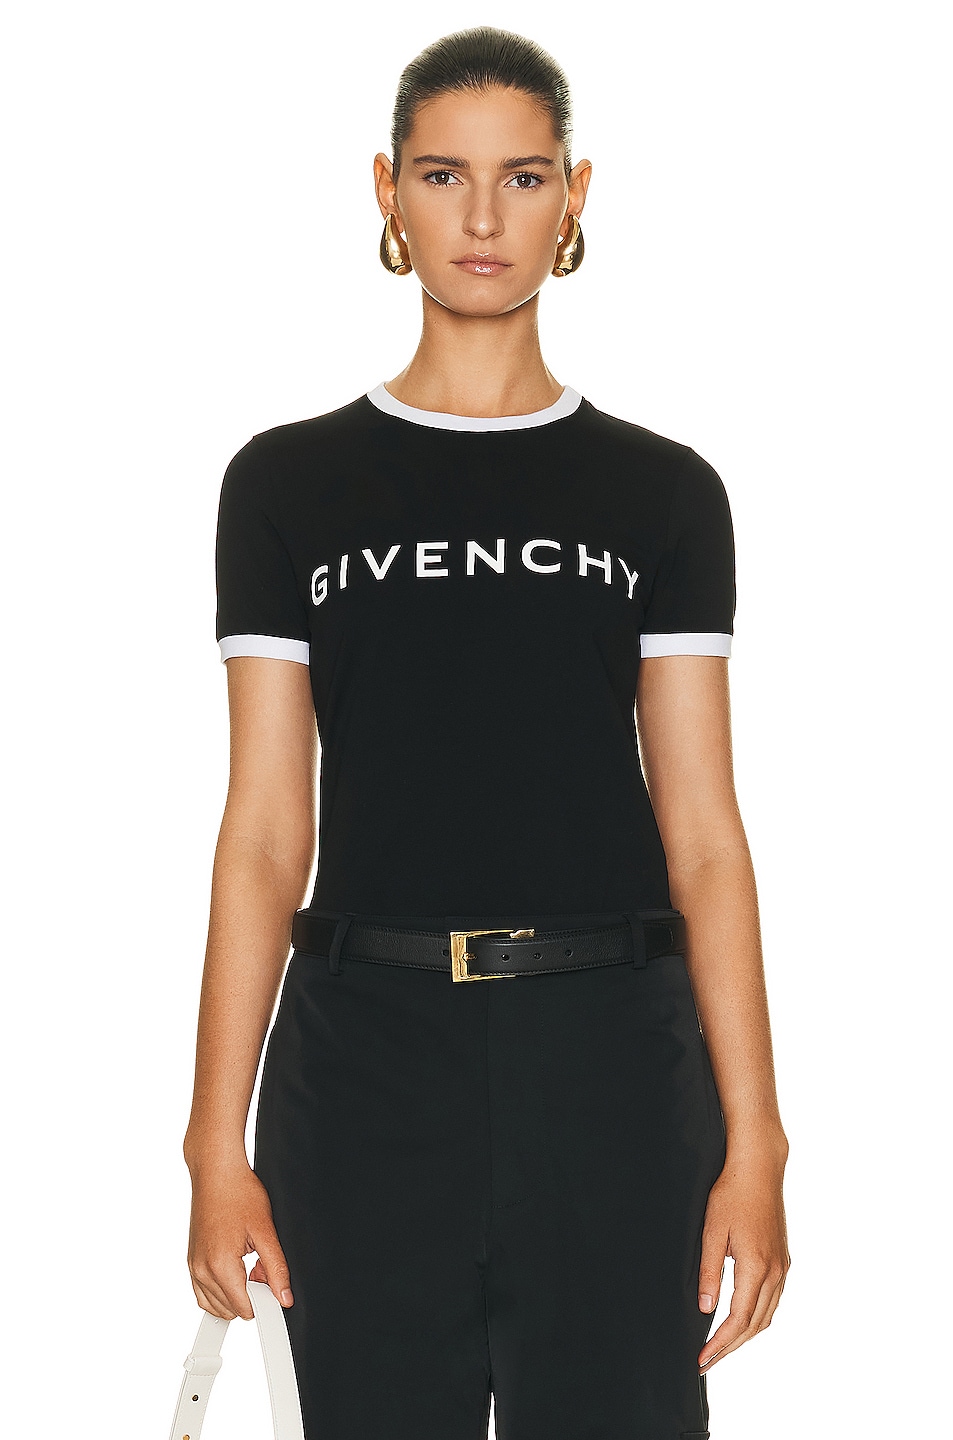 Image 1 of Givenchy Ringer T-shirt in Black & White